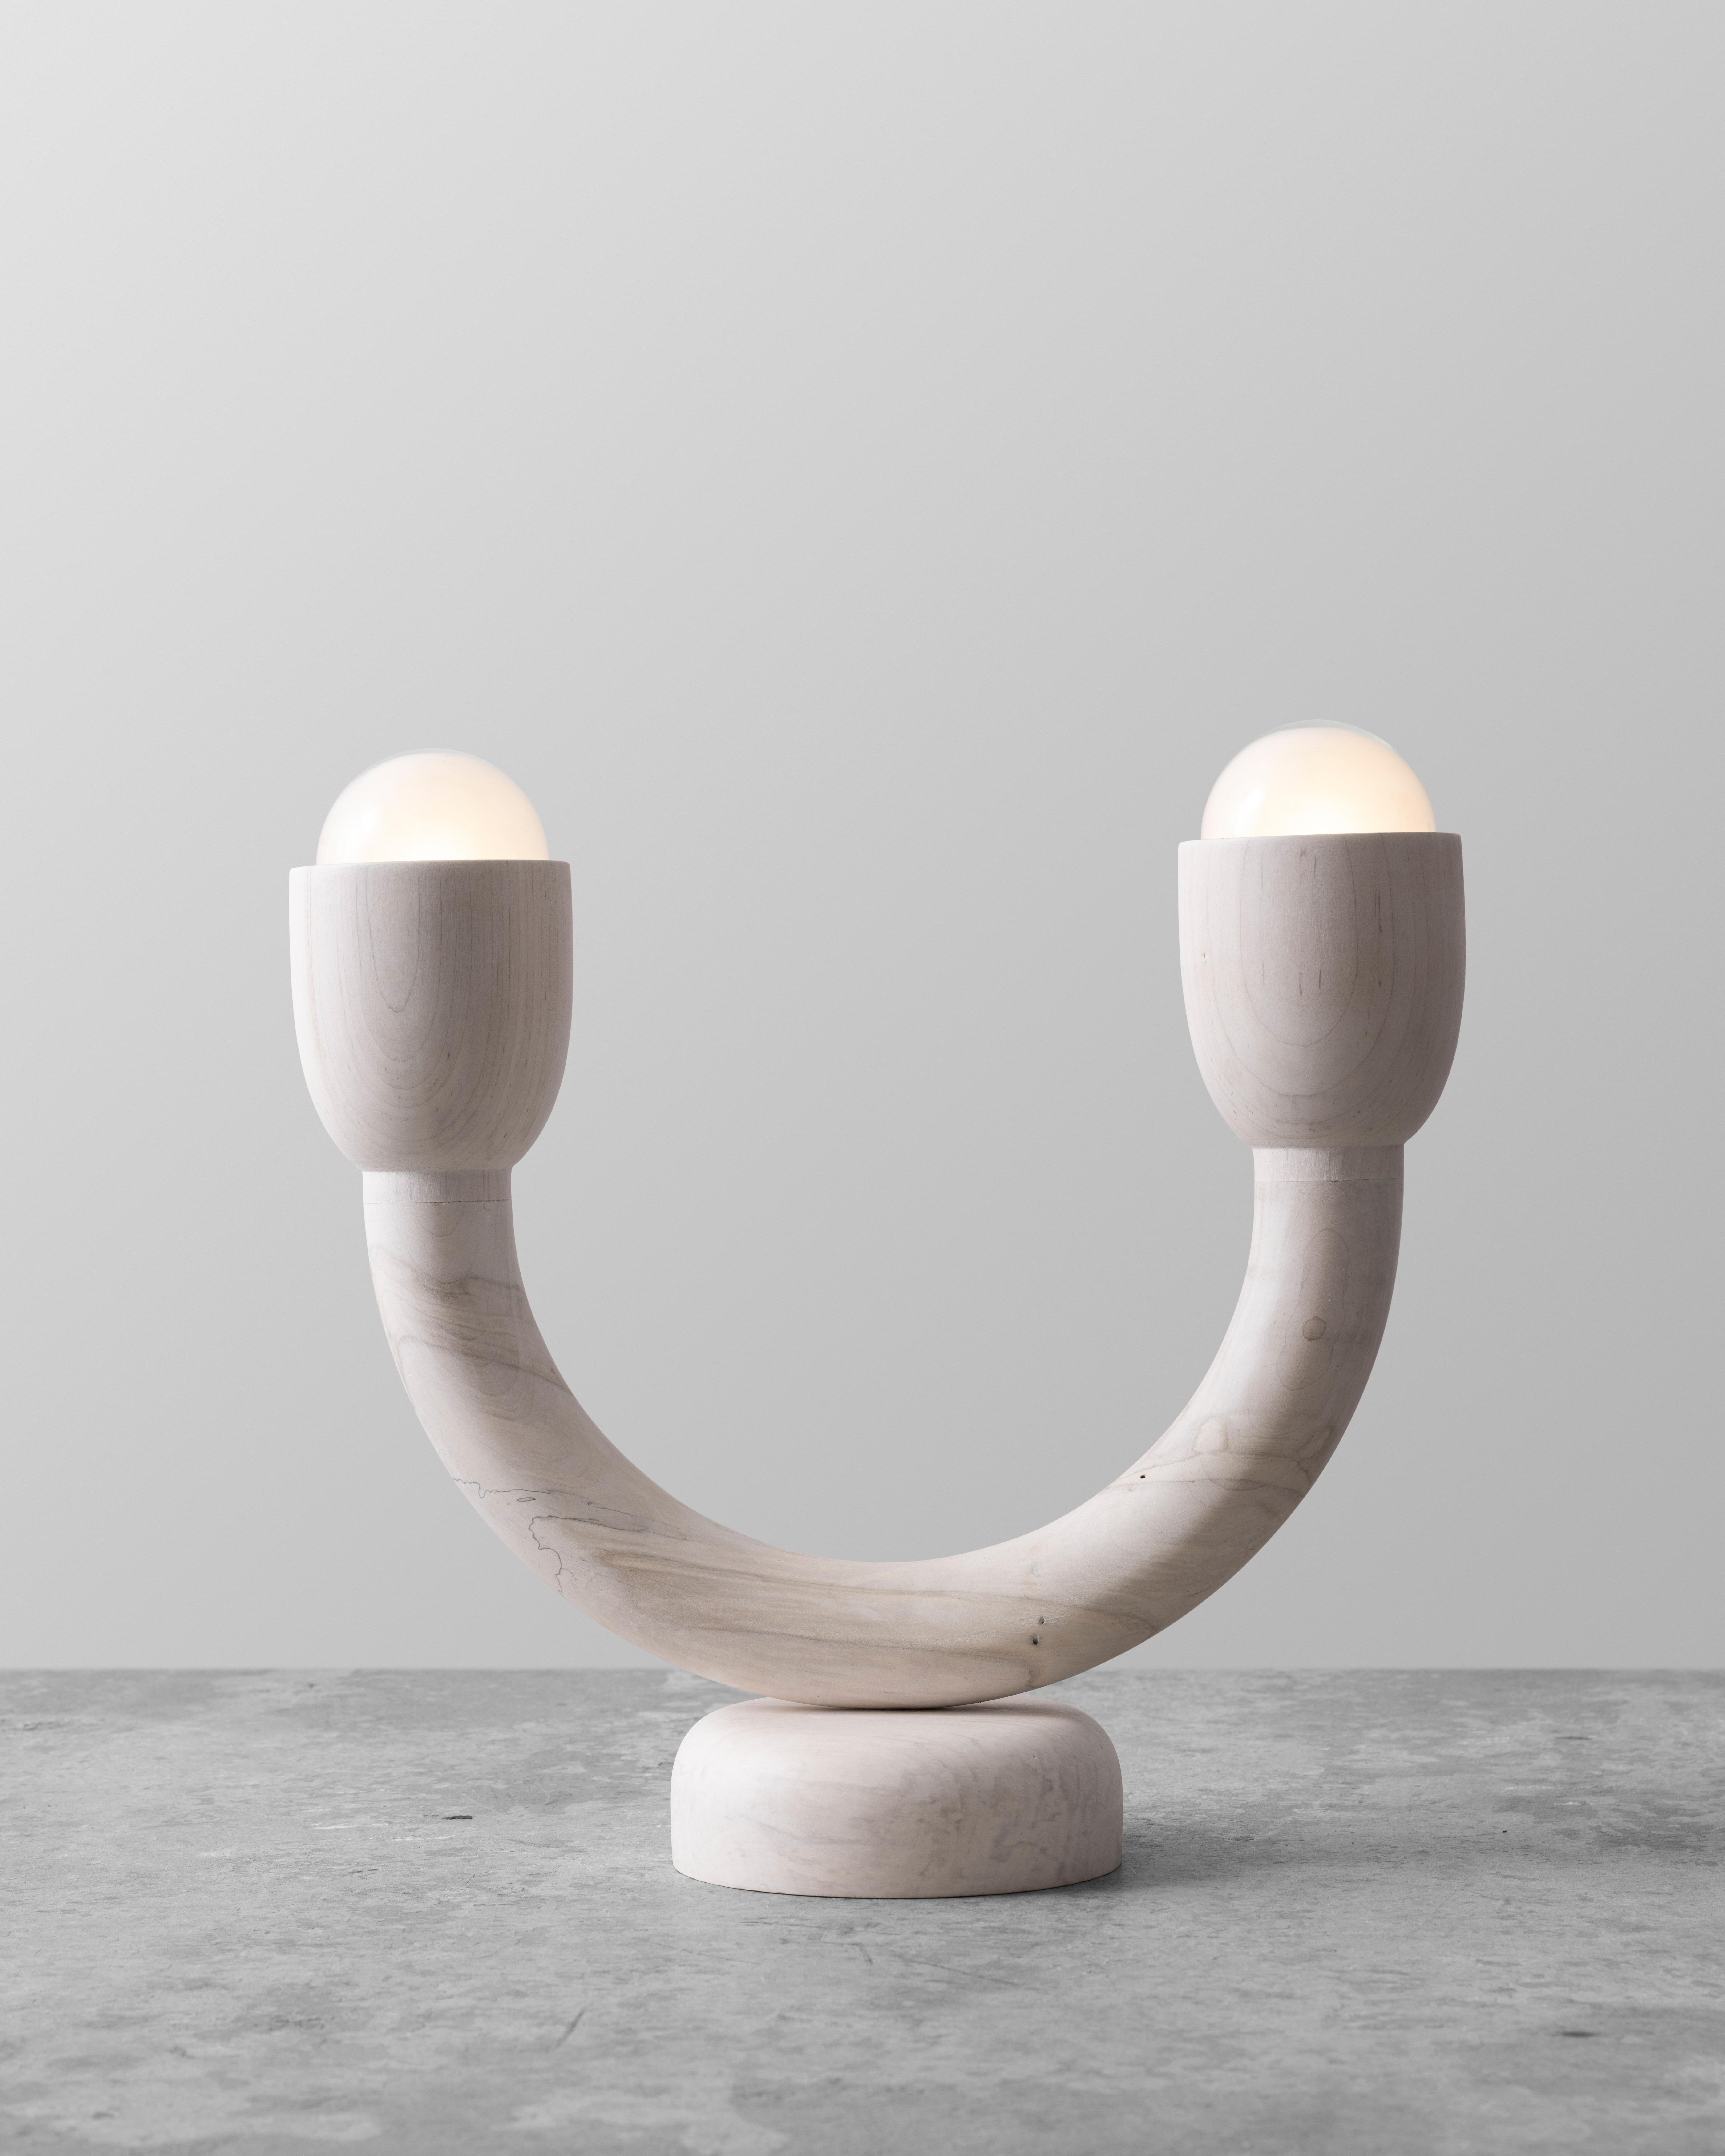 The Macaroni table light was created through an exploration of shaping solid Ambrosia Maple lumber. Designed to bring a smile to any space, each light part is thoughtfully selected to highlight the grain pattern and characteristics of Maple. The